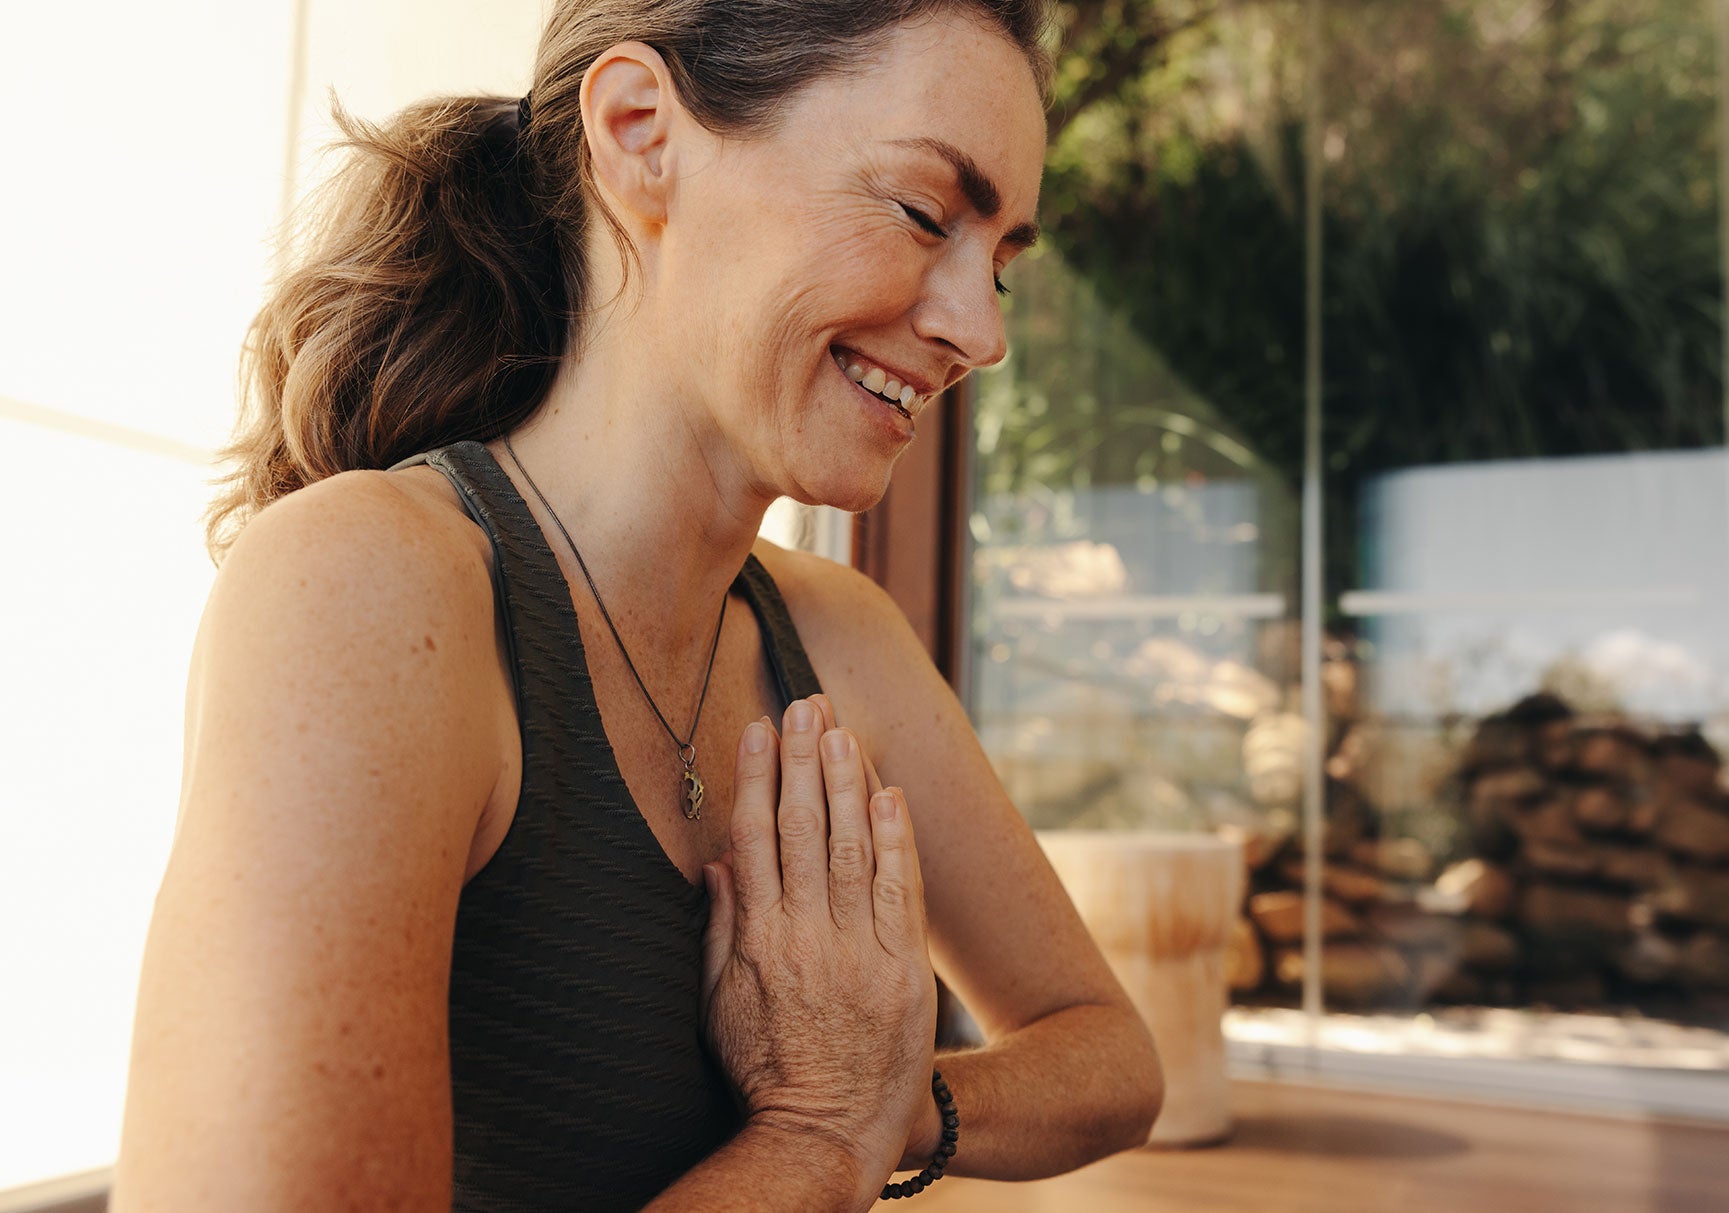 Happy senior woman smiling while meditating in prayer position at home. Mature woman doing a relaxation exercise during a yoga session. Cheerful elderly woman practicing a healthy workout routine.